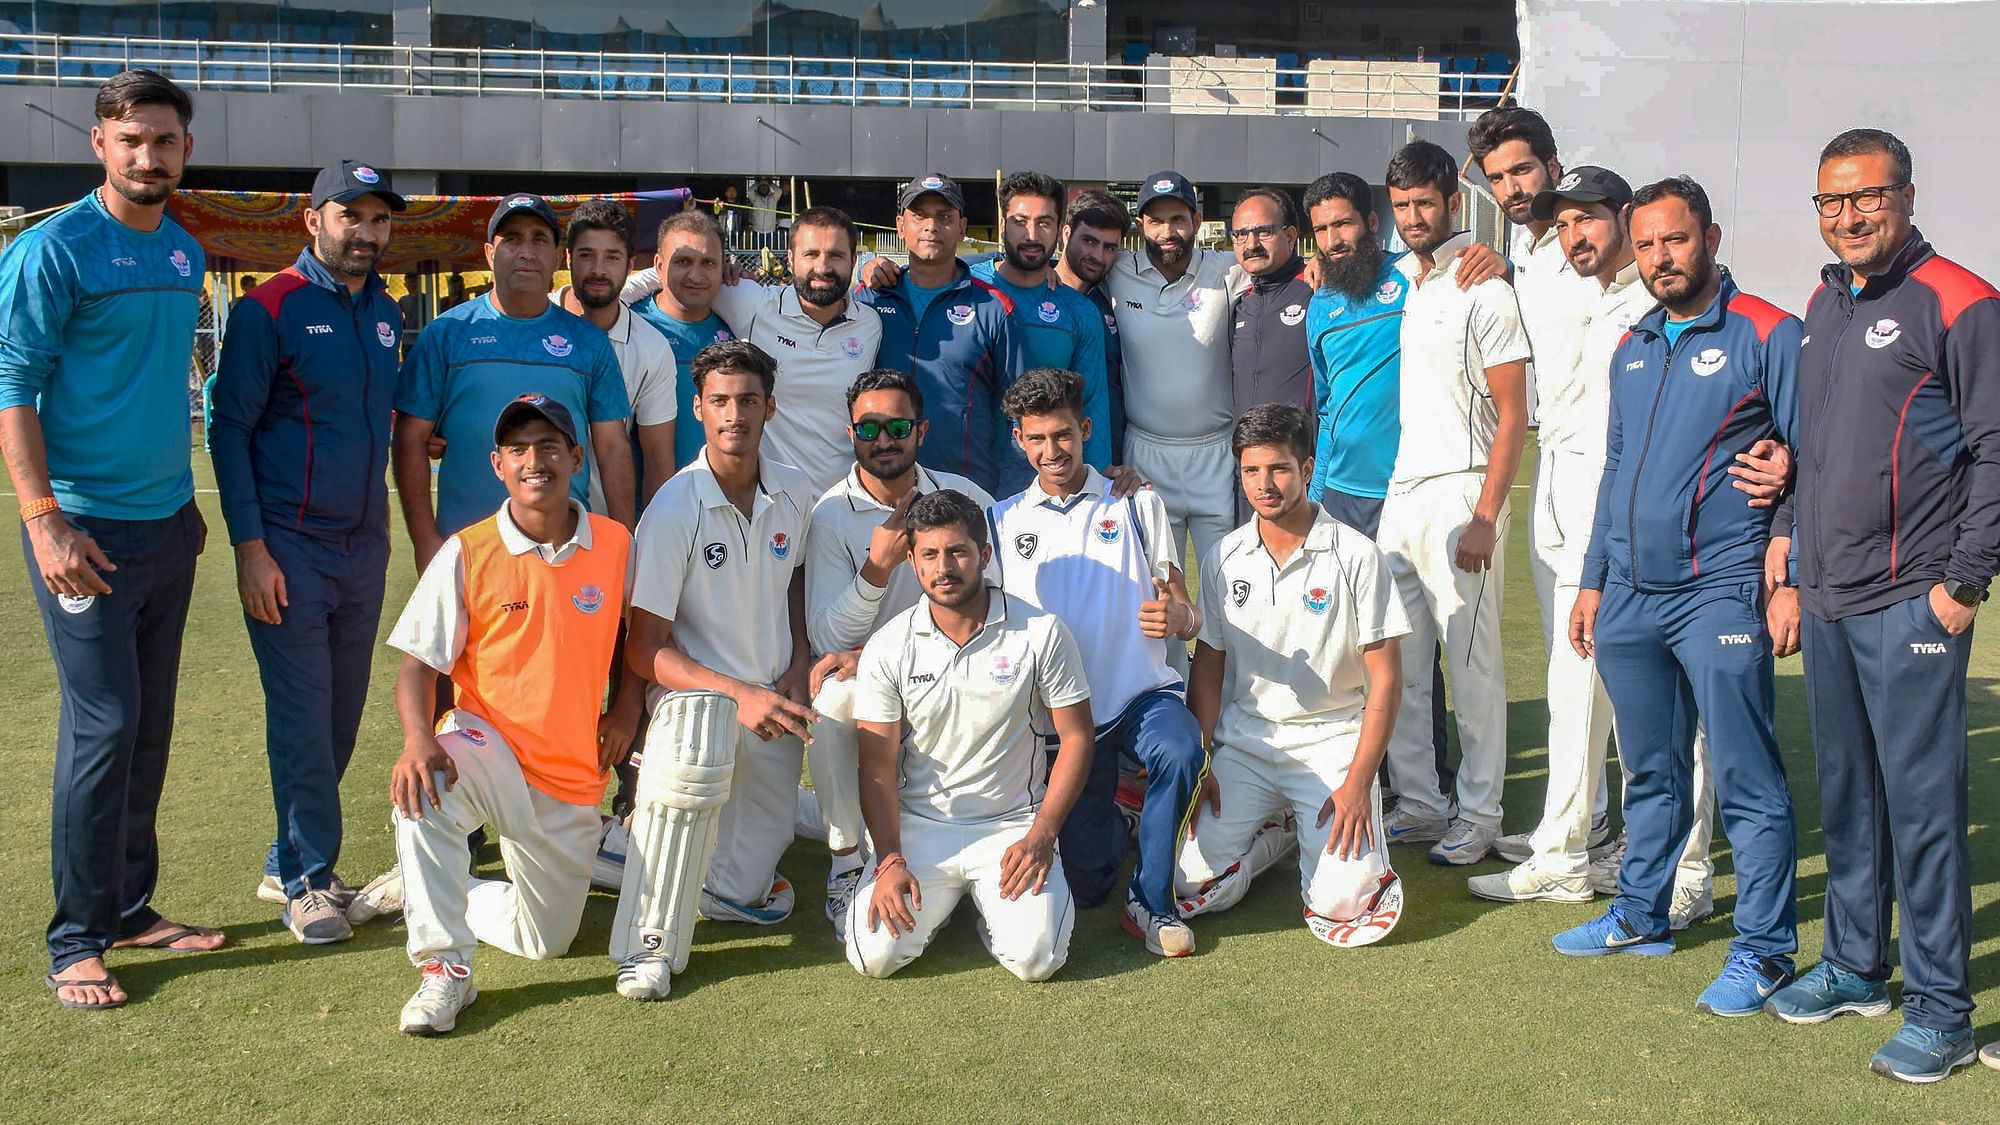 Players and officials of Jammu and Kashmir Ranji team pose for a photograph after winning the match against Assam in Guwahati on 1 January 2019.